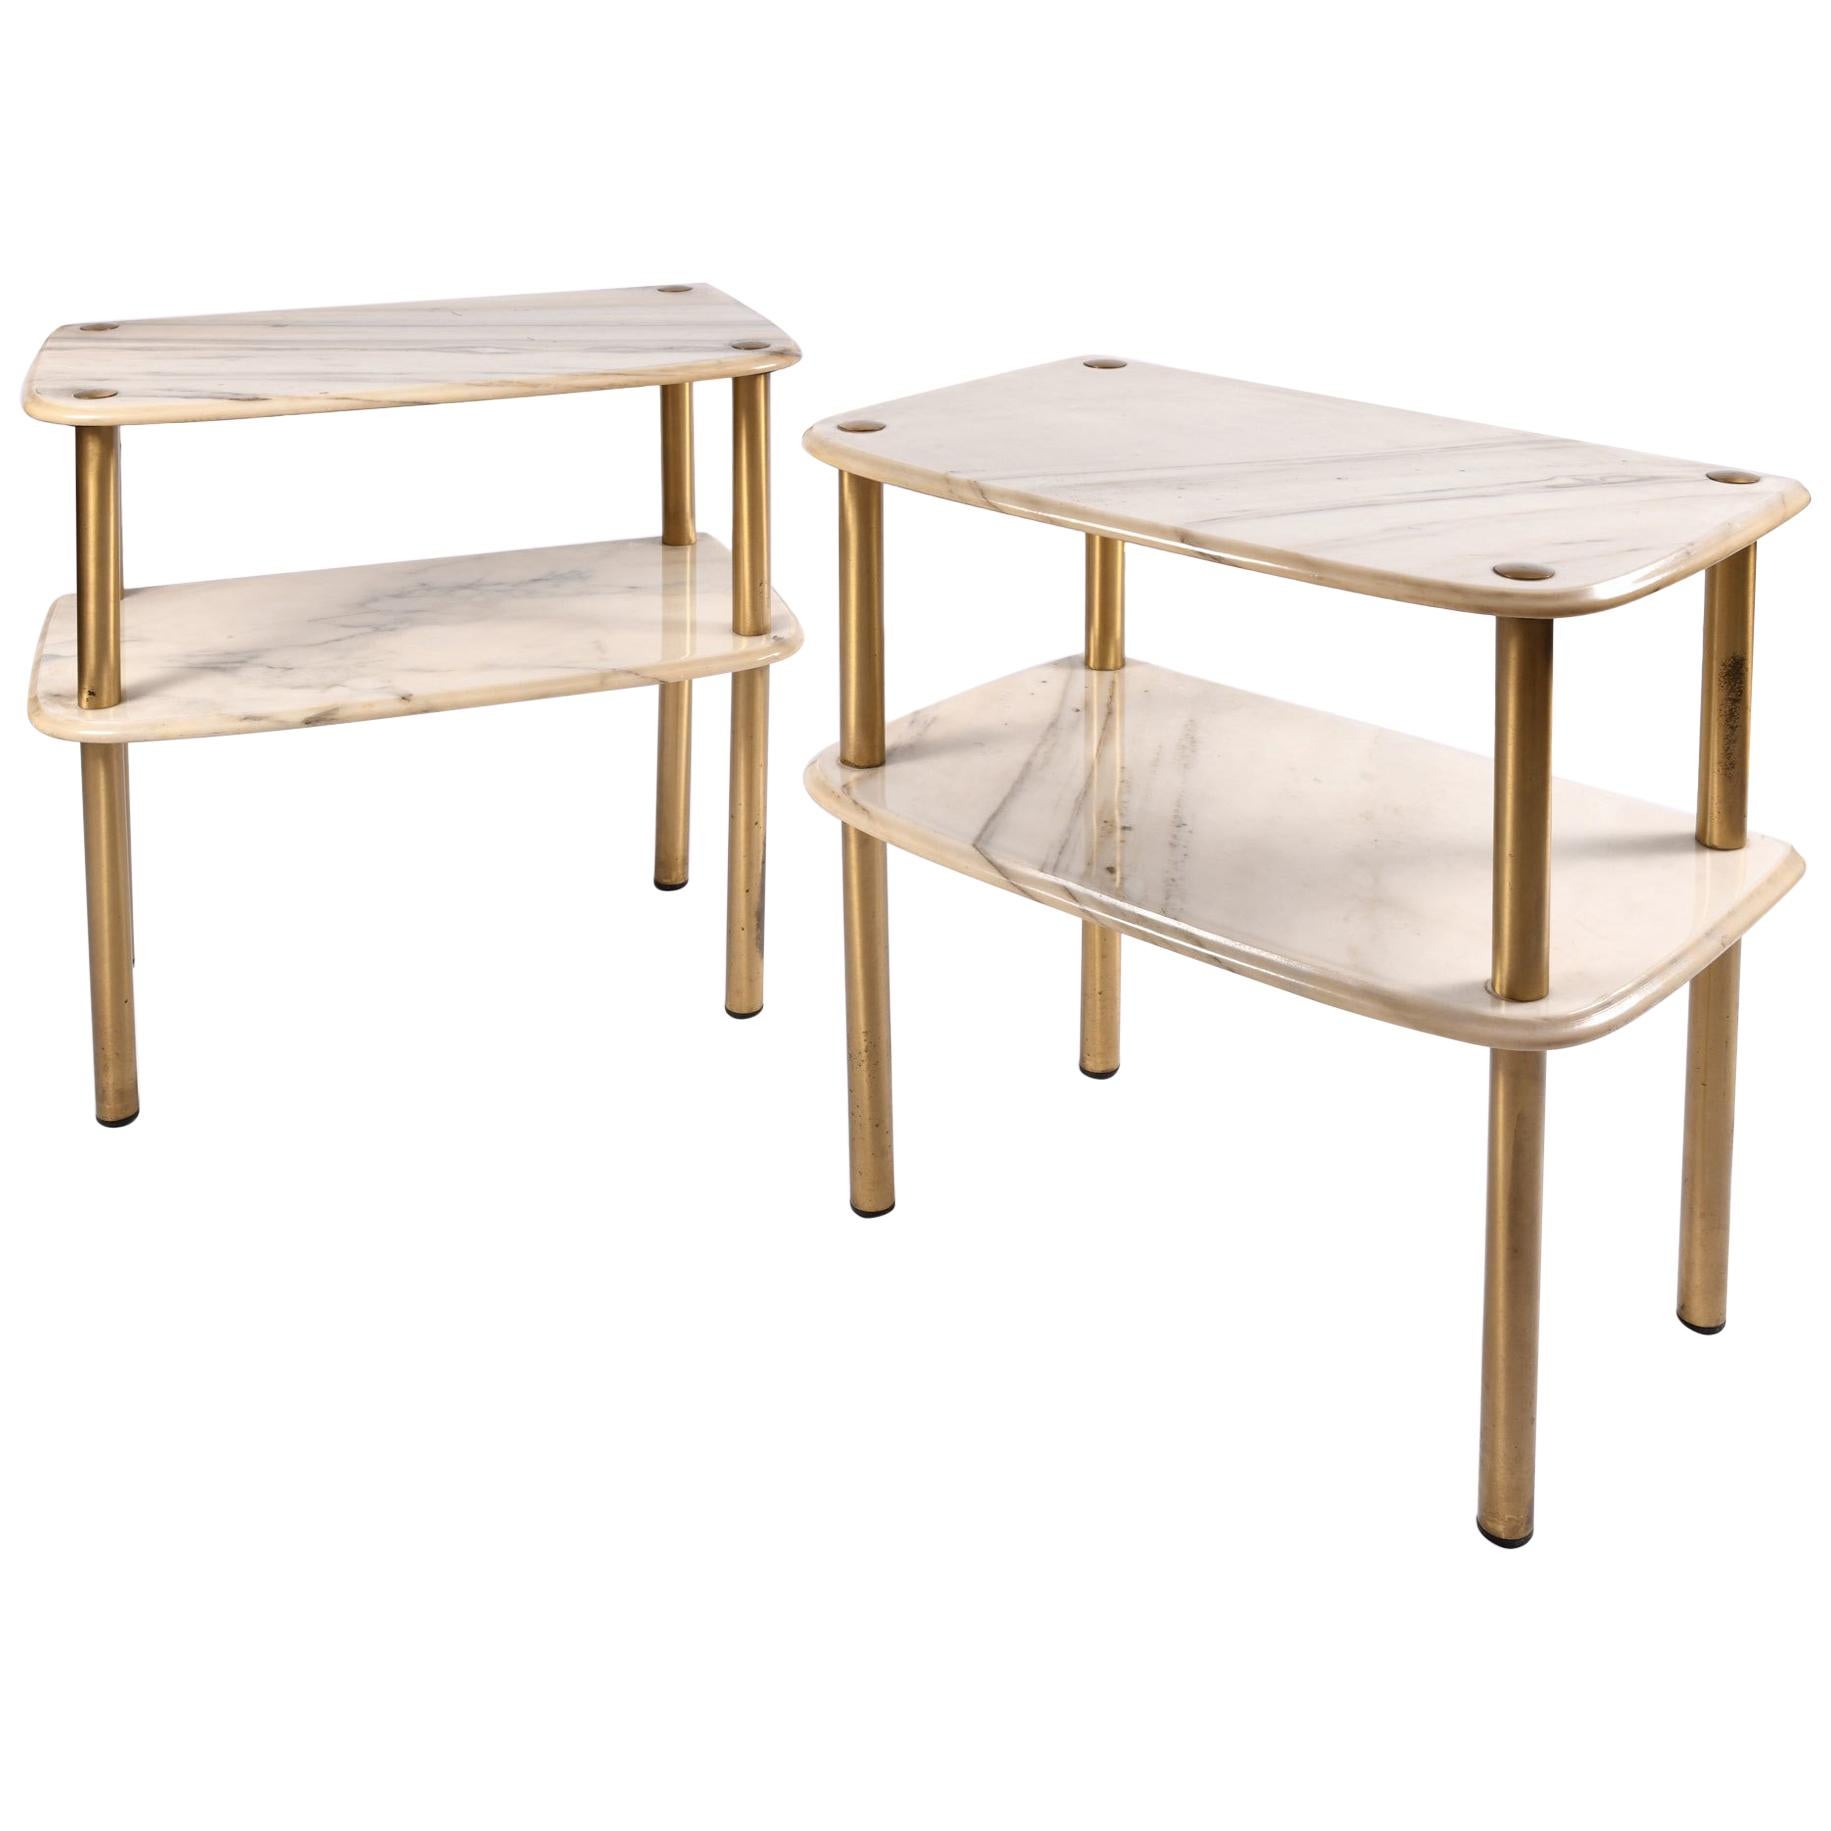 Pair of 1950s Italian Marble-Topped Side Tables